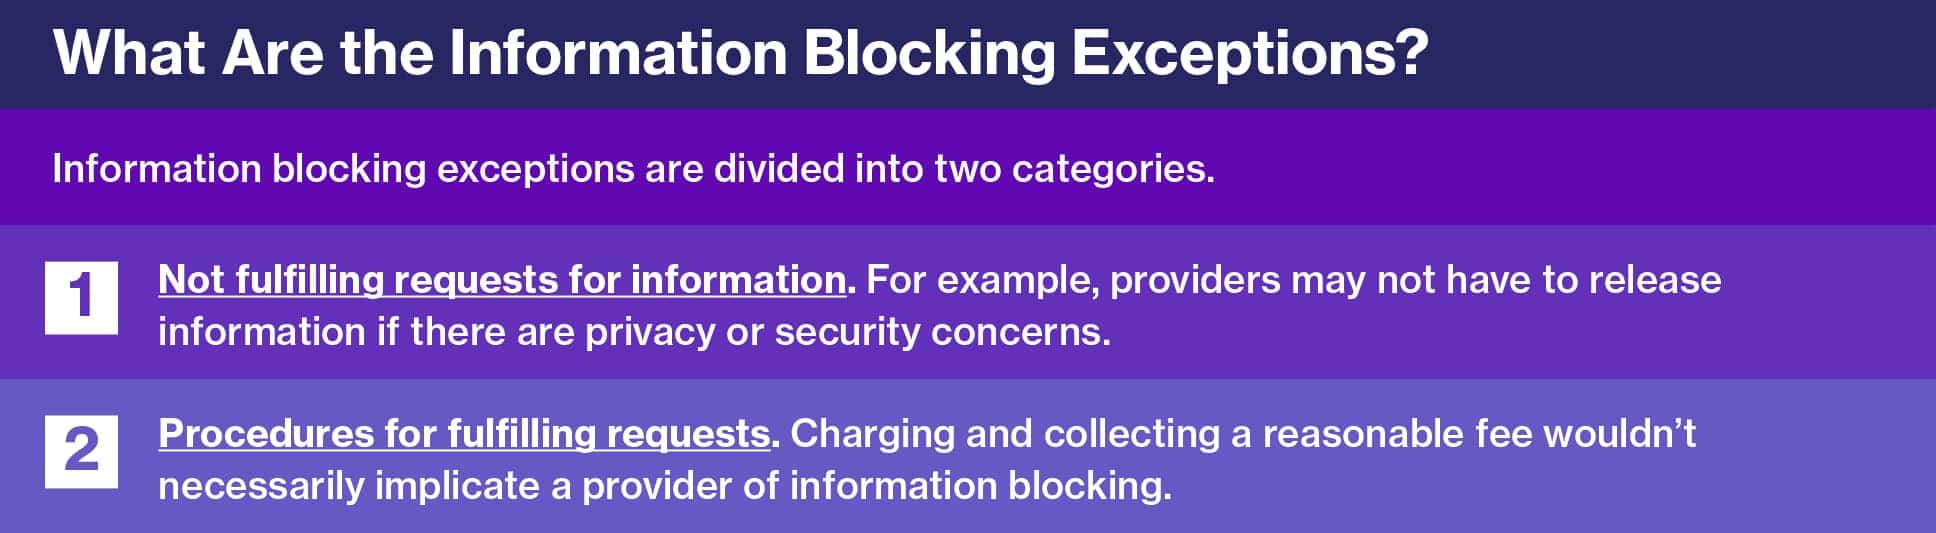 Information-blocking exceptions are divided into two categories.